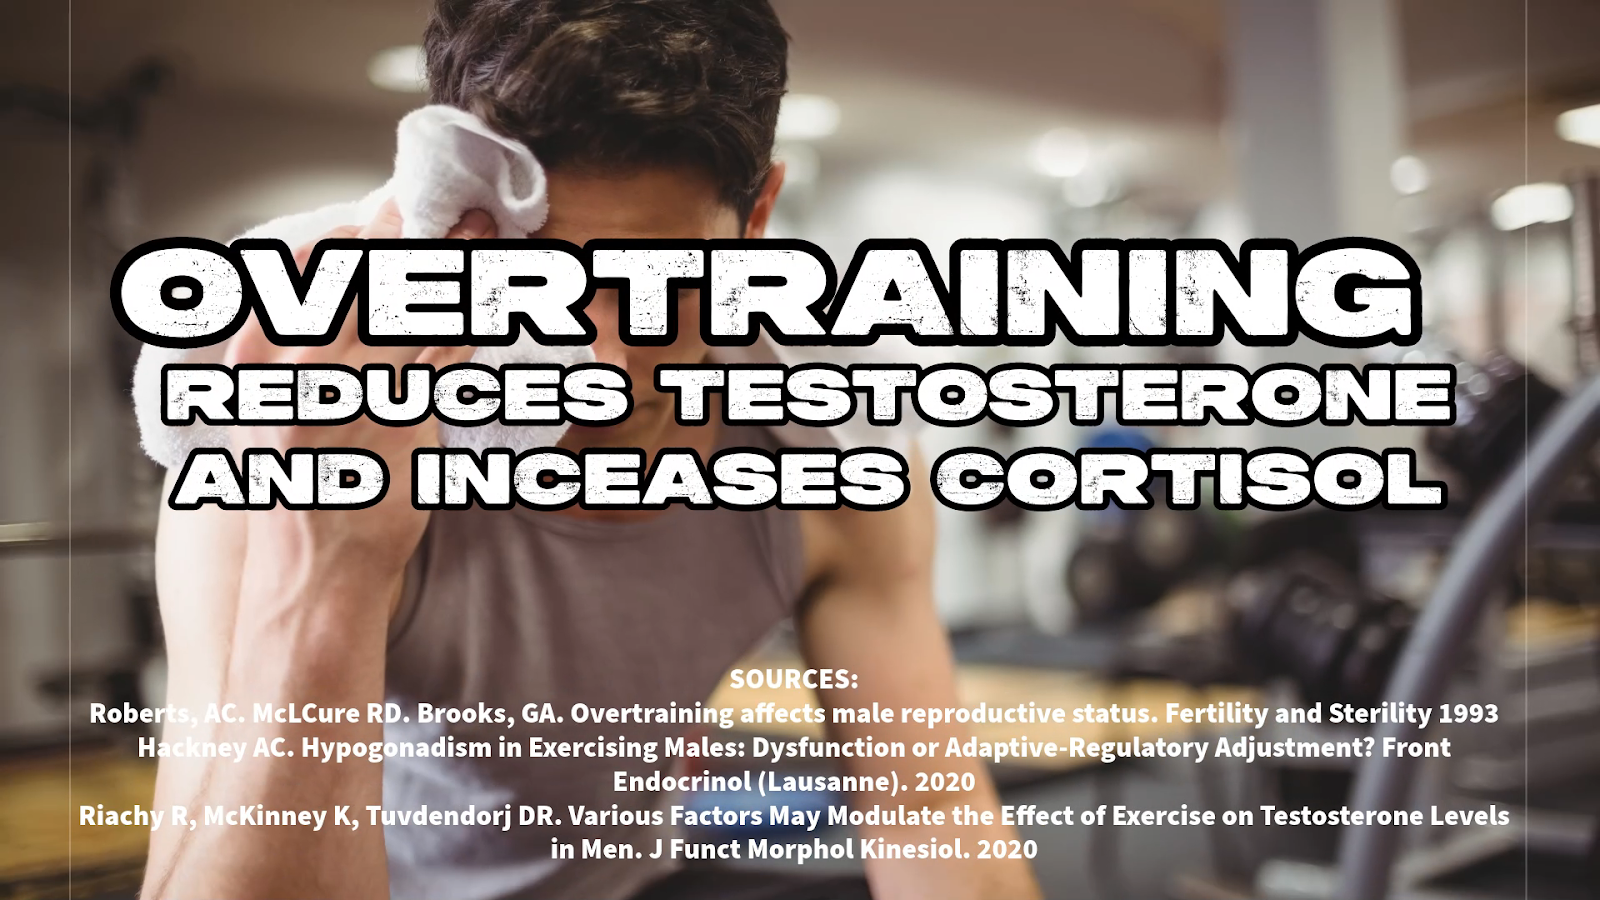 Overtraining can reduce testosterone and increase cortisol